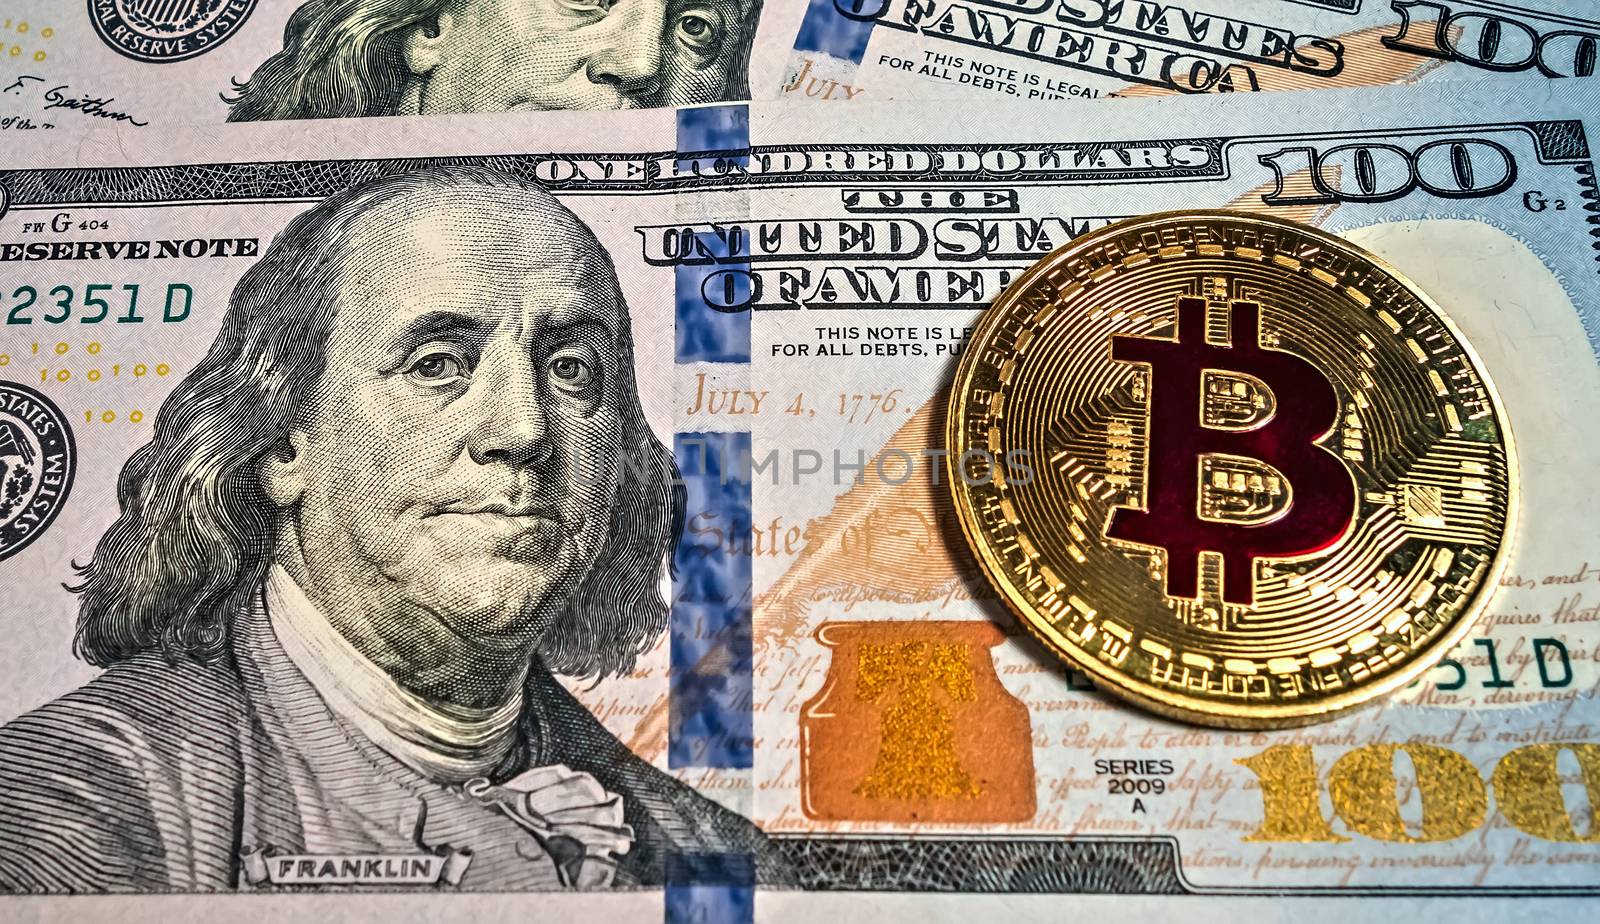 Gold bitcoin coin Macro portrait of Benjamin Franklin of dollar bills background cryptocurrency mining concept.